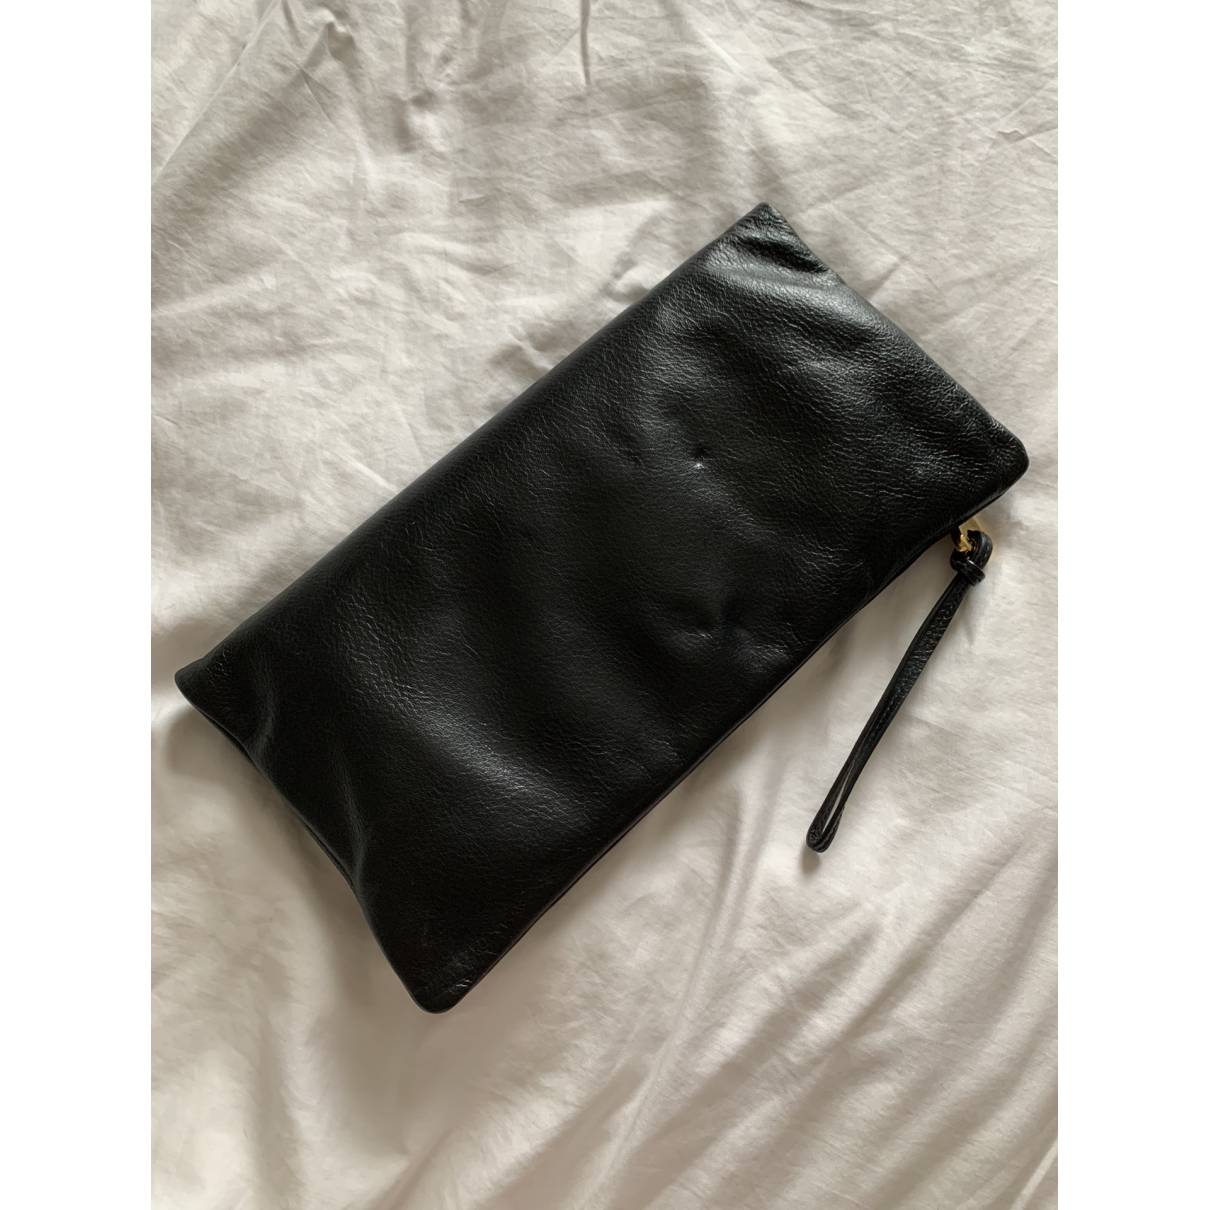 Mulberry - a Mulberry Daria clutch bag in black leather, gold tone  signature tree plaque, fold over flap with external zip closure, cross  grain lined interior with both internal zip pocket and